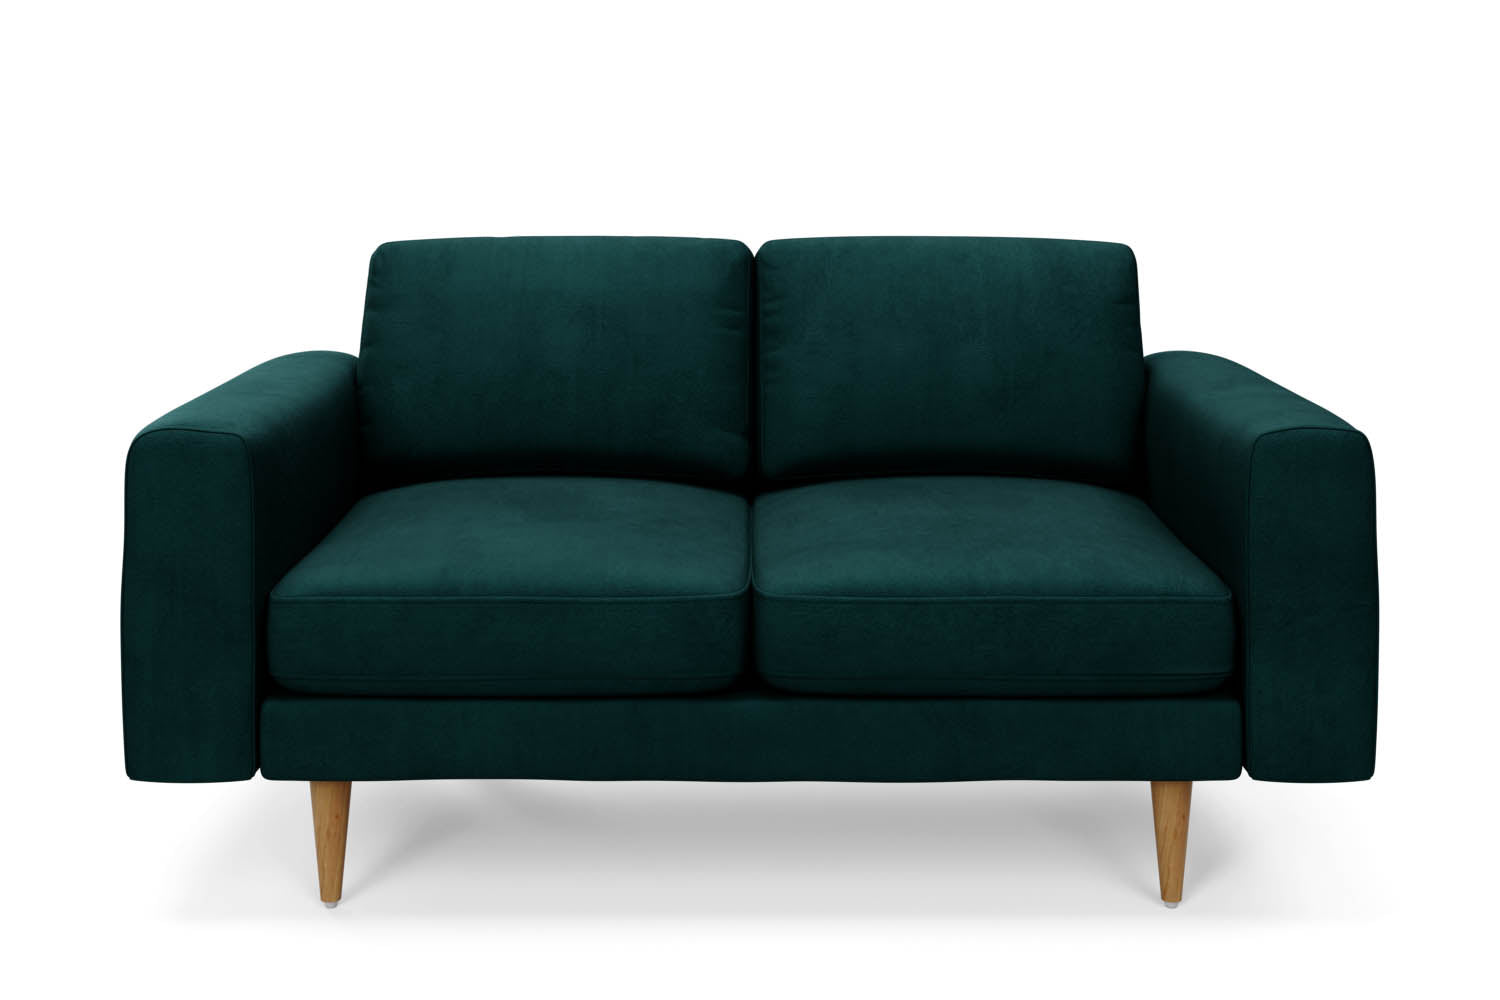 SNUG | The Big Chill 2 Seater Sofa in Pine Green variant_40837198544944